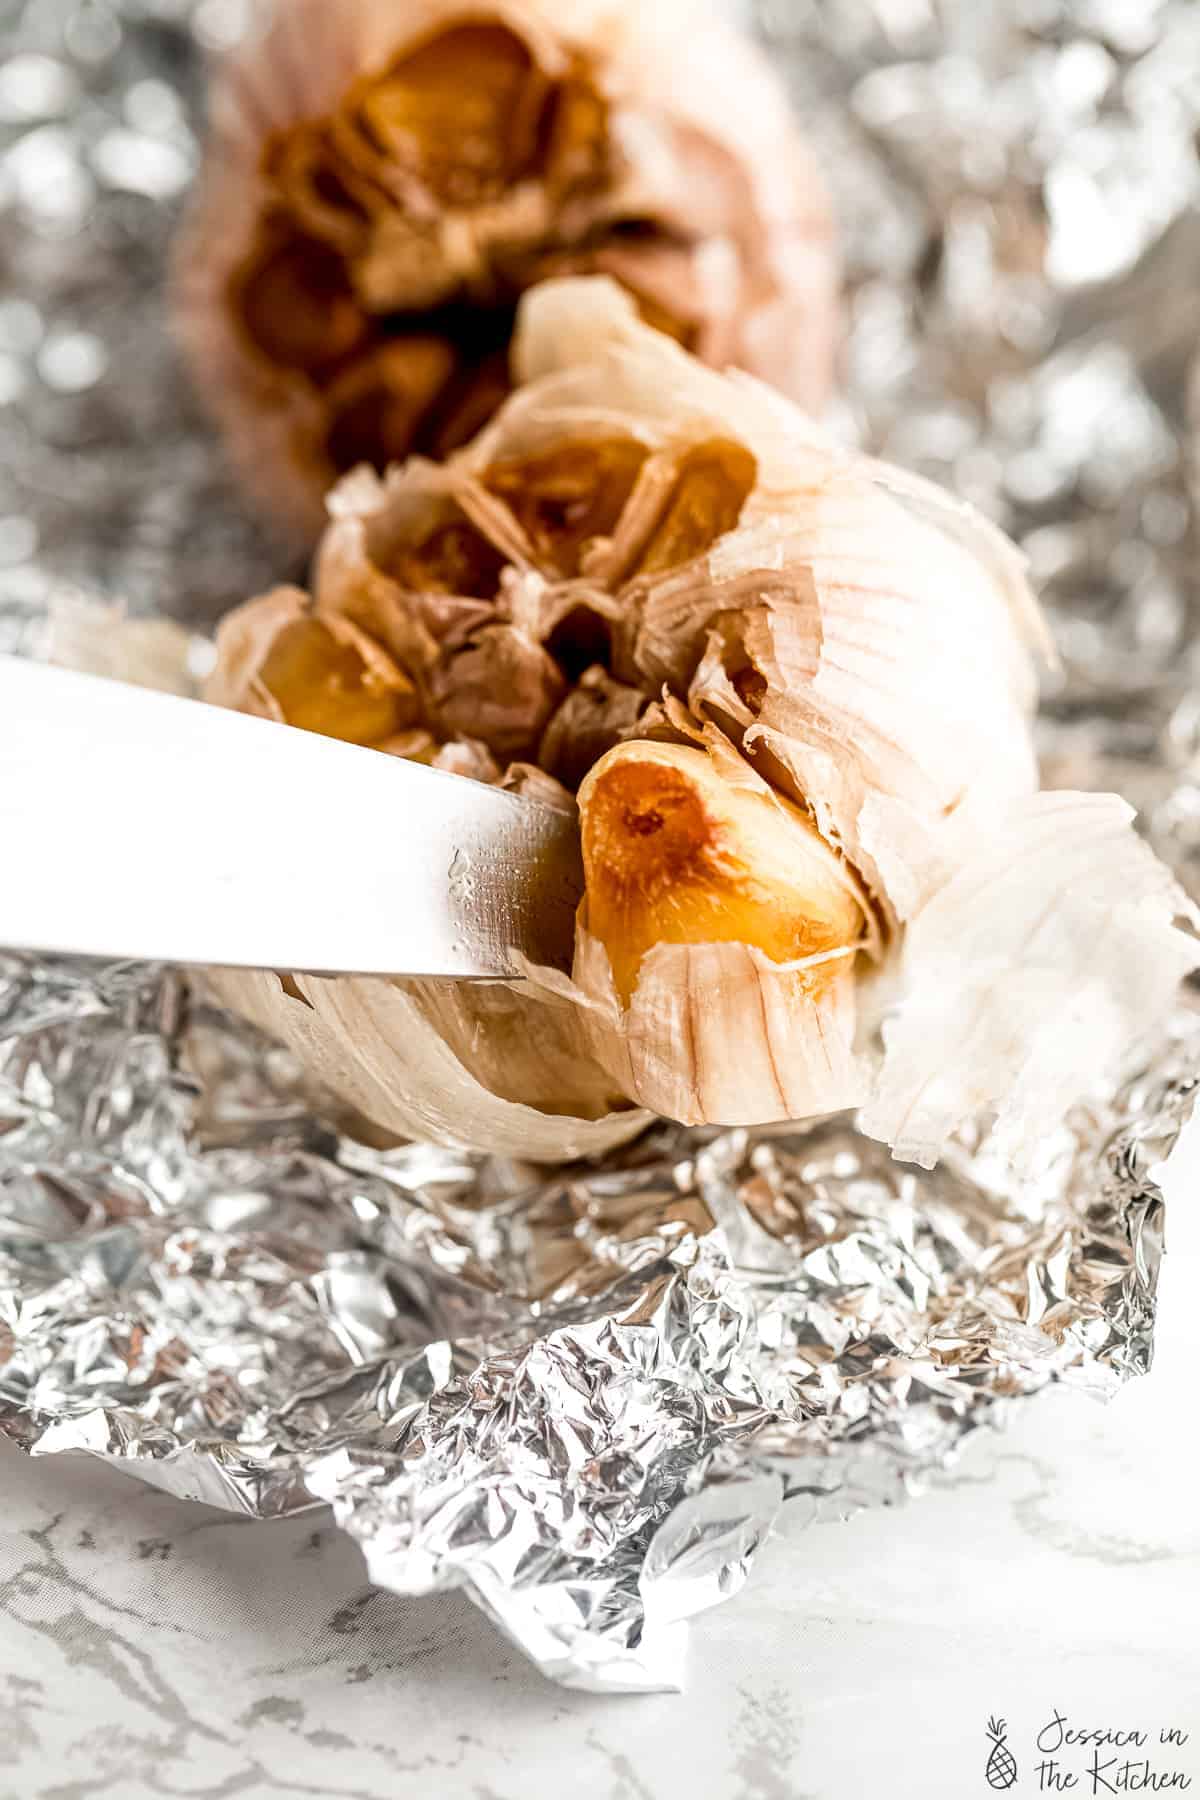 A knife slicing into a bulb of roasted garlic.